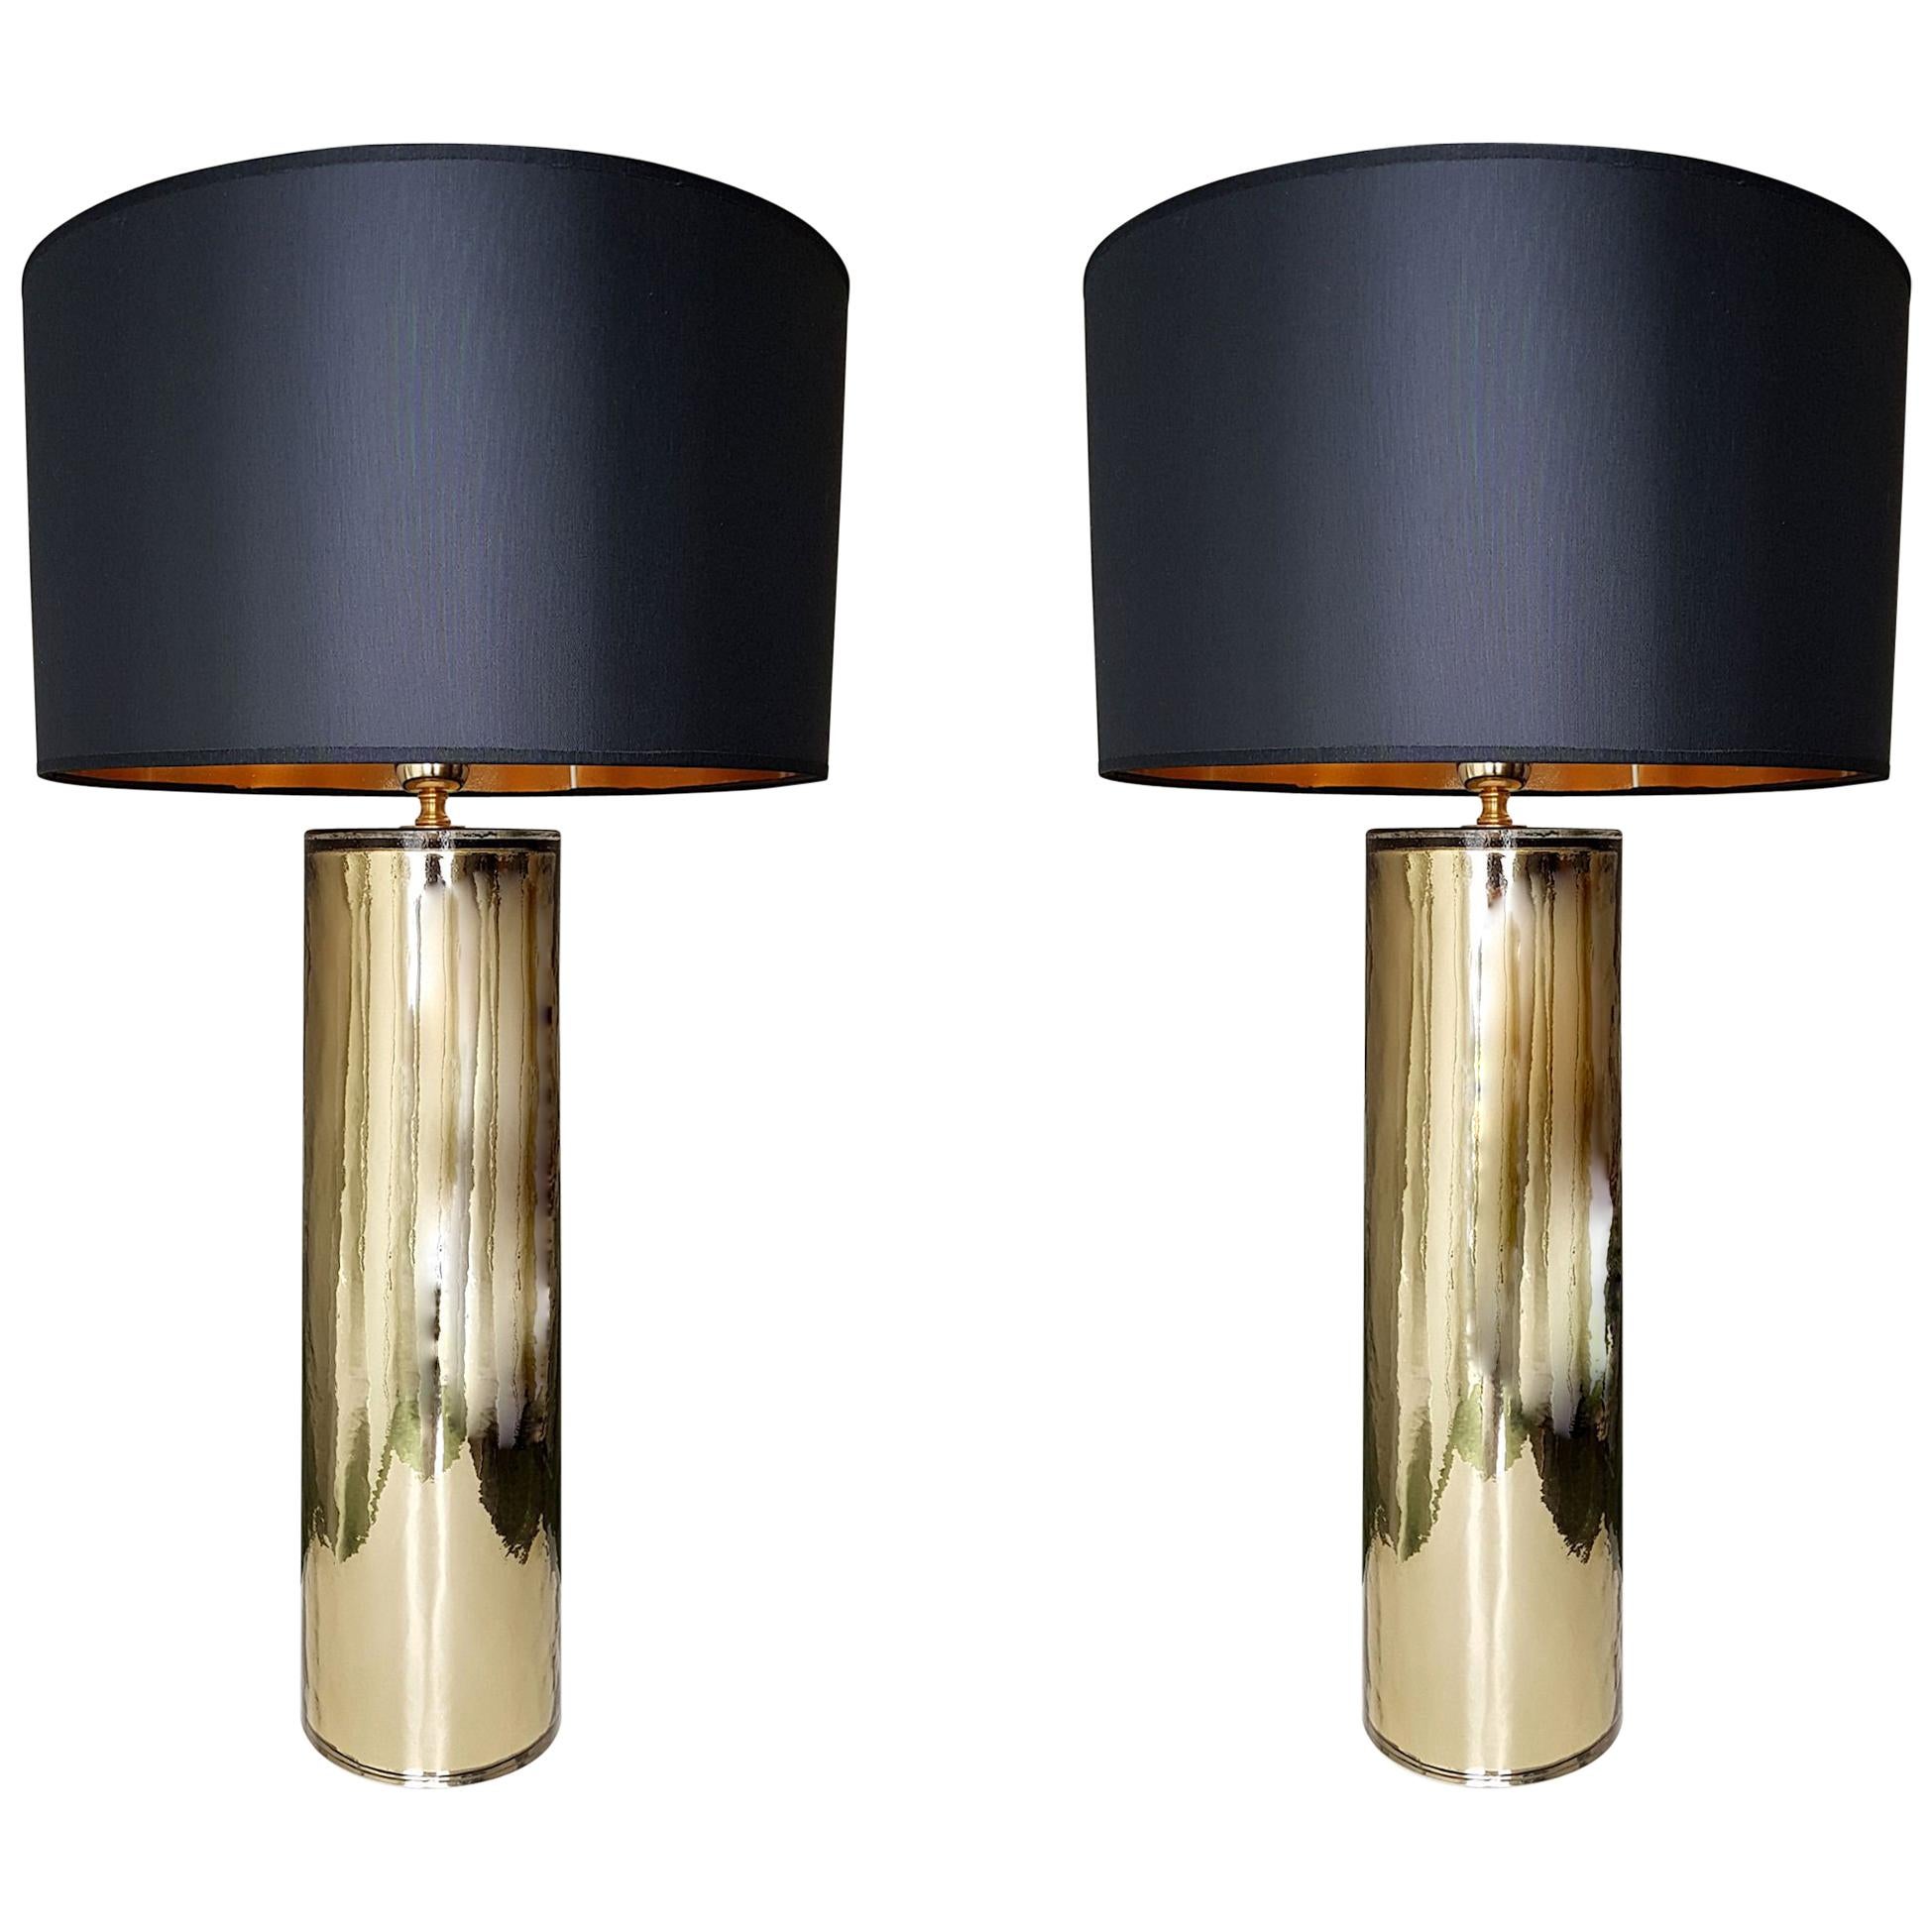 Pair of Gold Cylinder Murano Glass Lamps, Mid-Century Modern, Venini Style 1970s